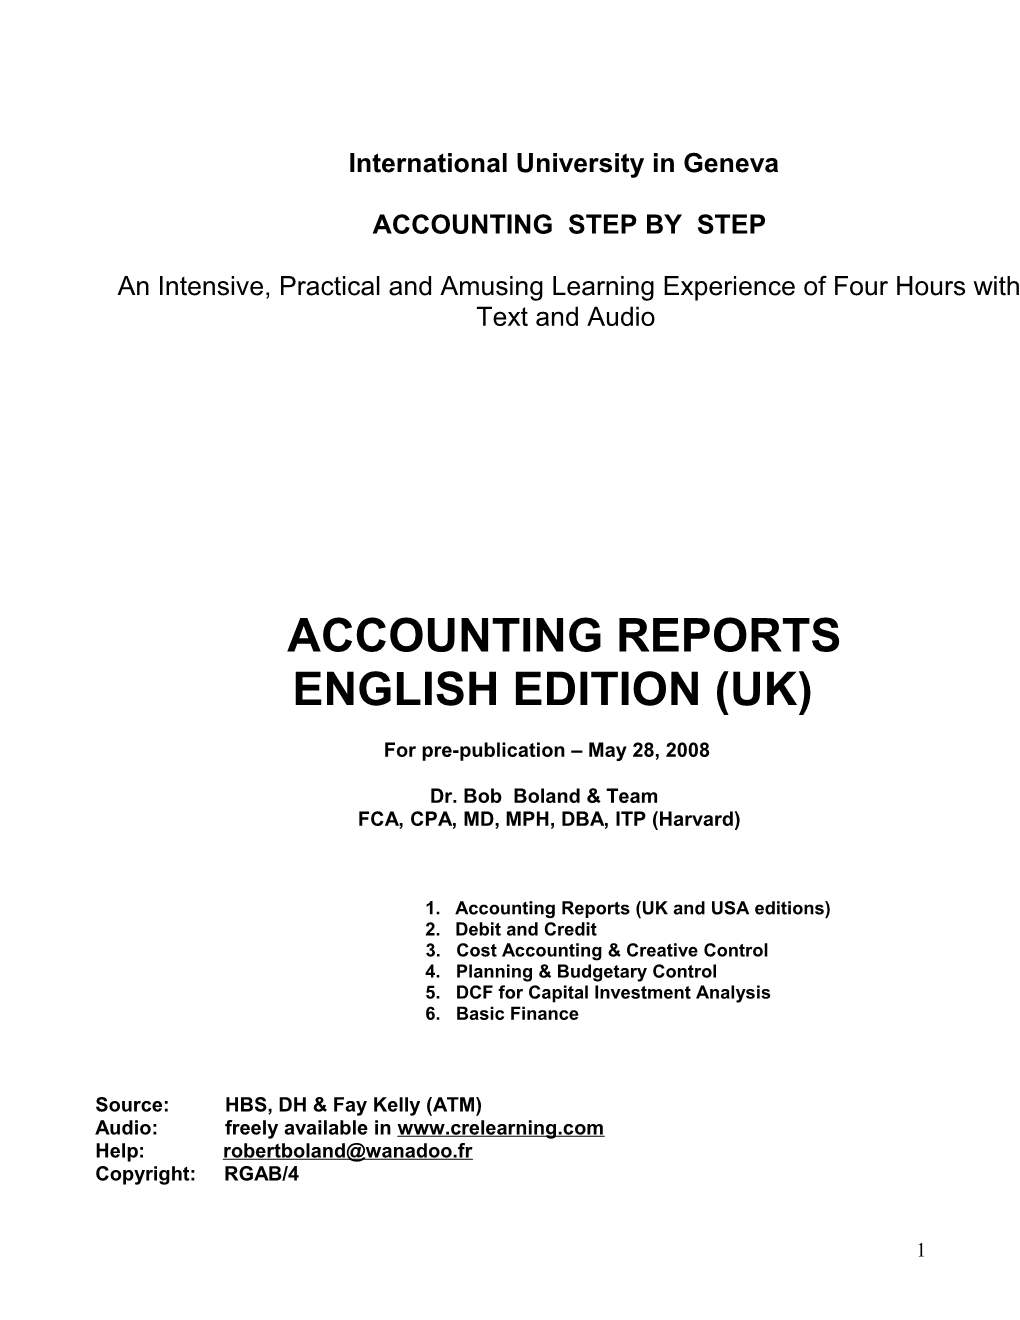 Accounting Step by Step